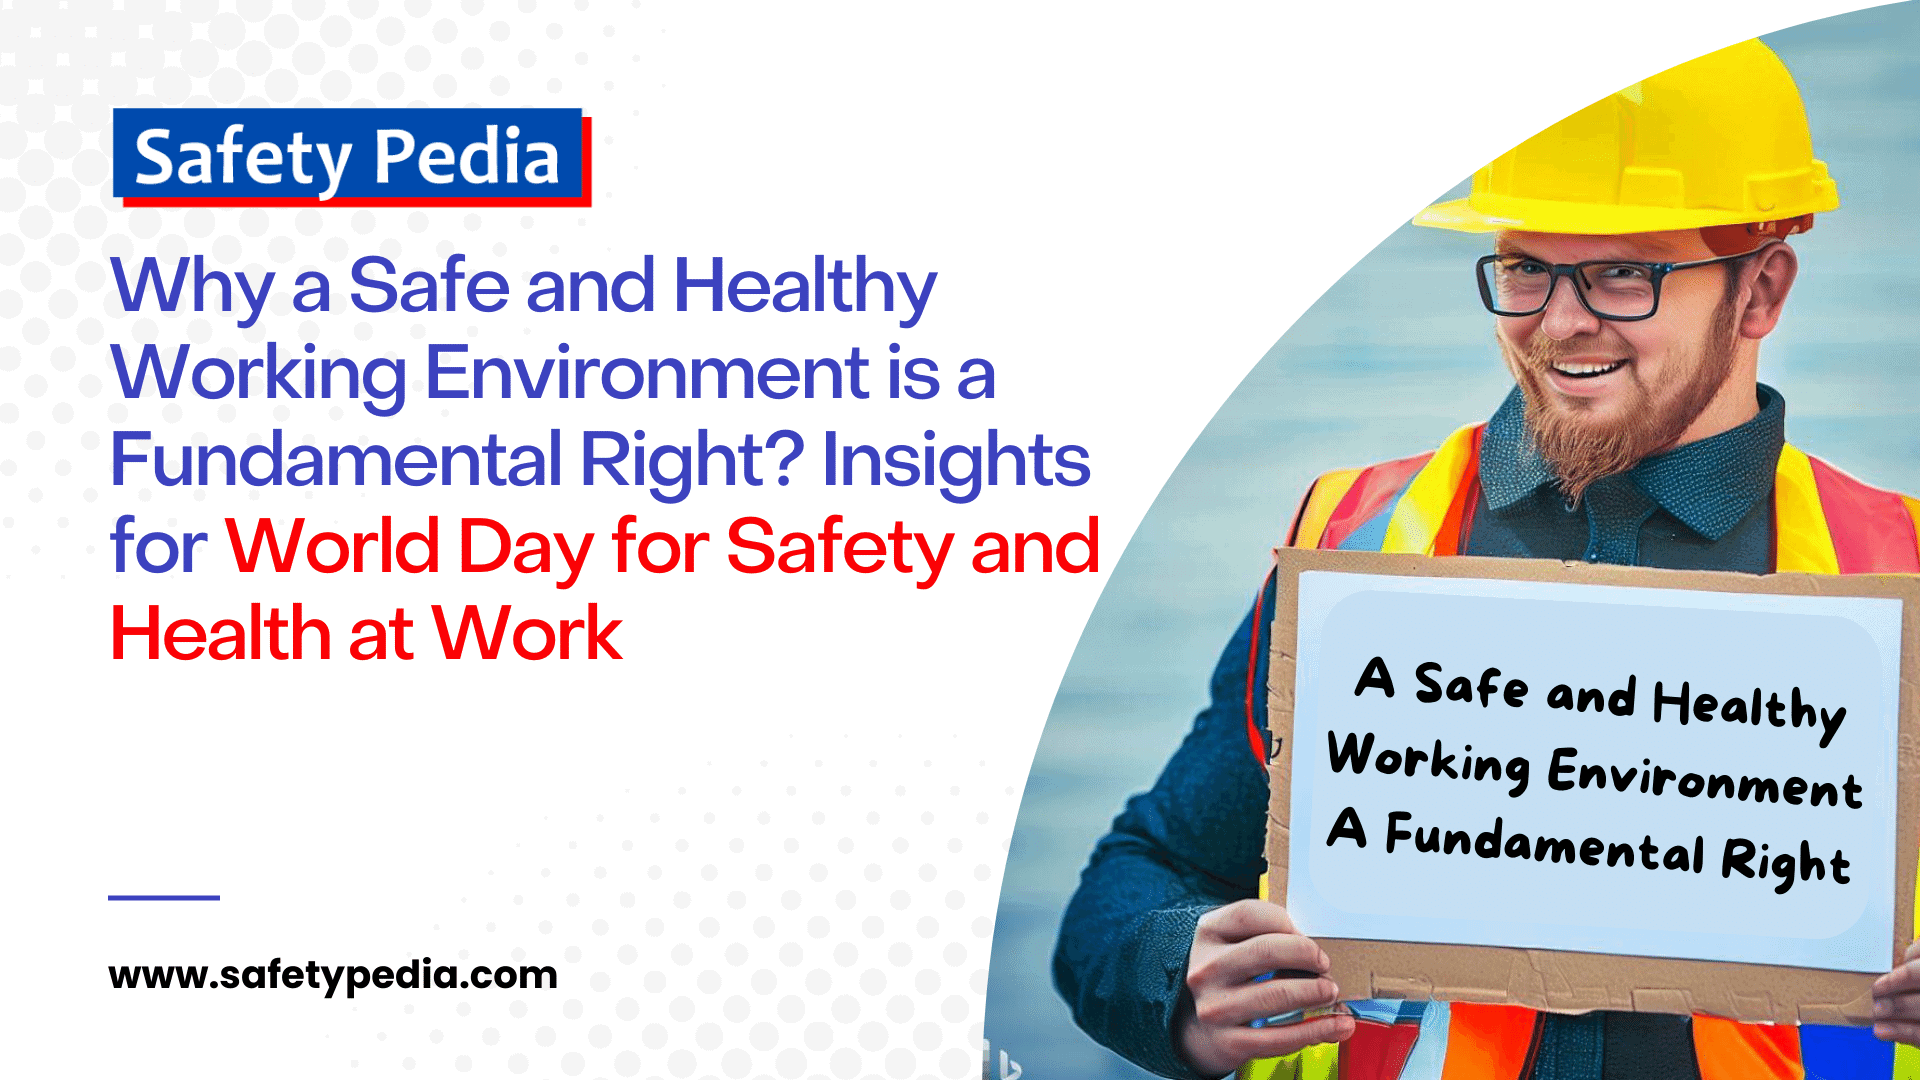 A Safe and Healthy Working Environment is a Fundamental Right: Insights for World Day for Safety and Health at Work 2023